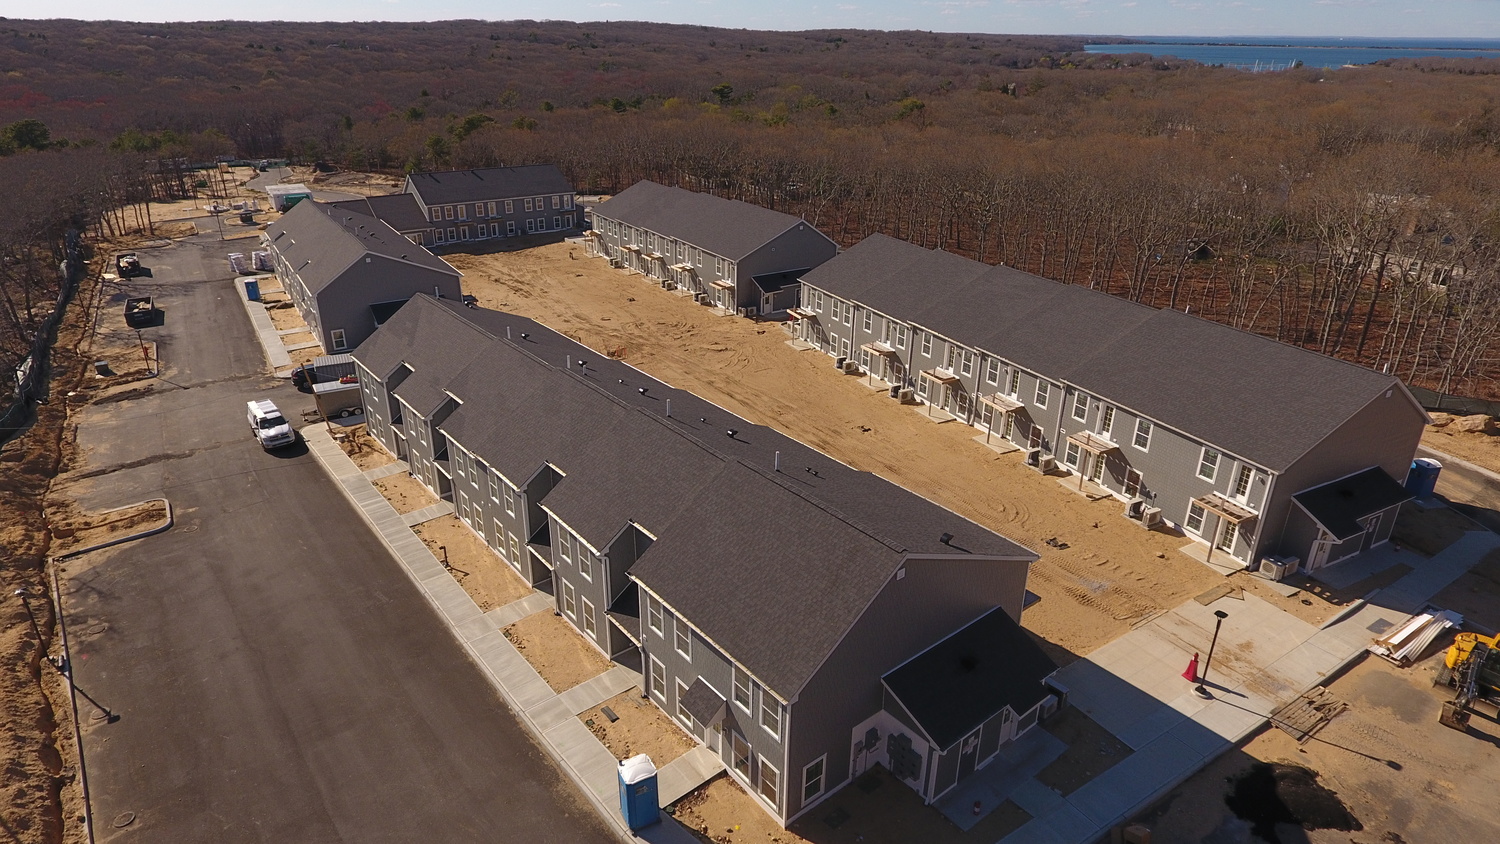 The East Hampton Housing Authority has started taking applications for potential tenants at The Green at Gardiners Point, a 50 unit rental apartment development that will be completed this summer. MICHAEL WRIGHT